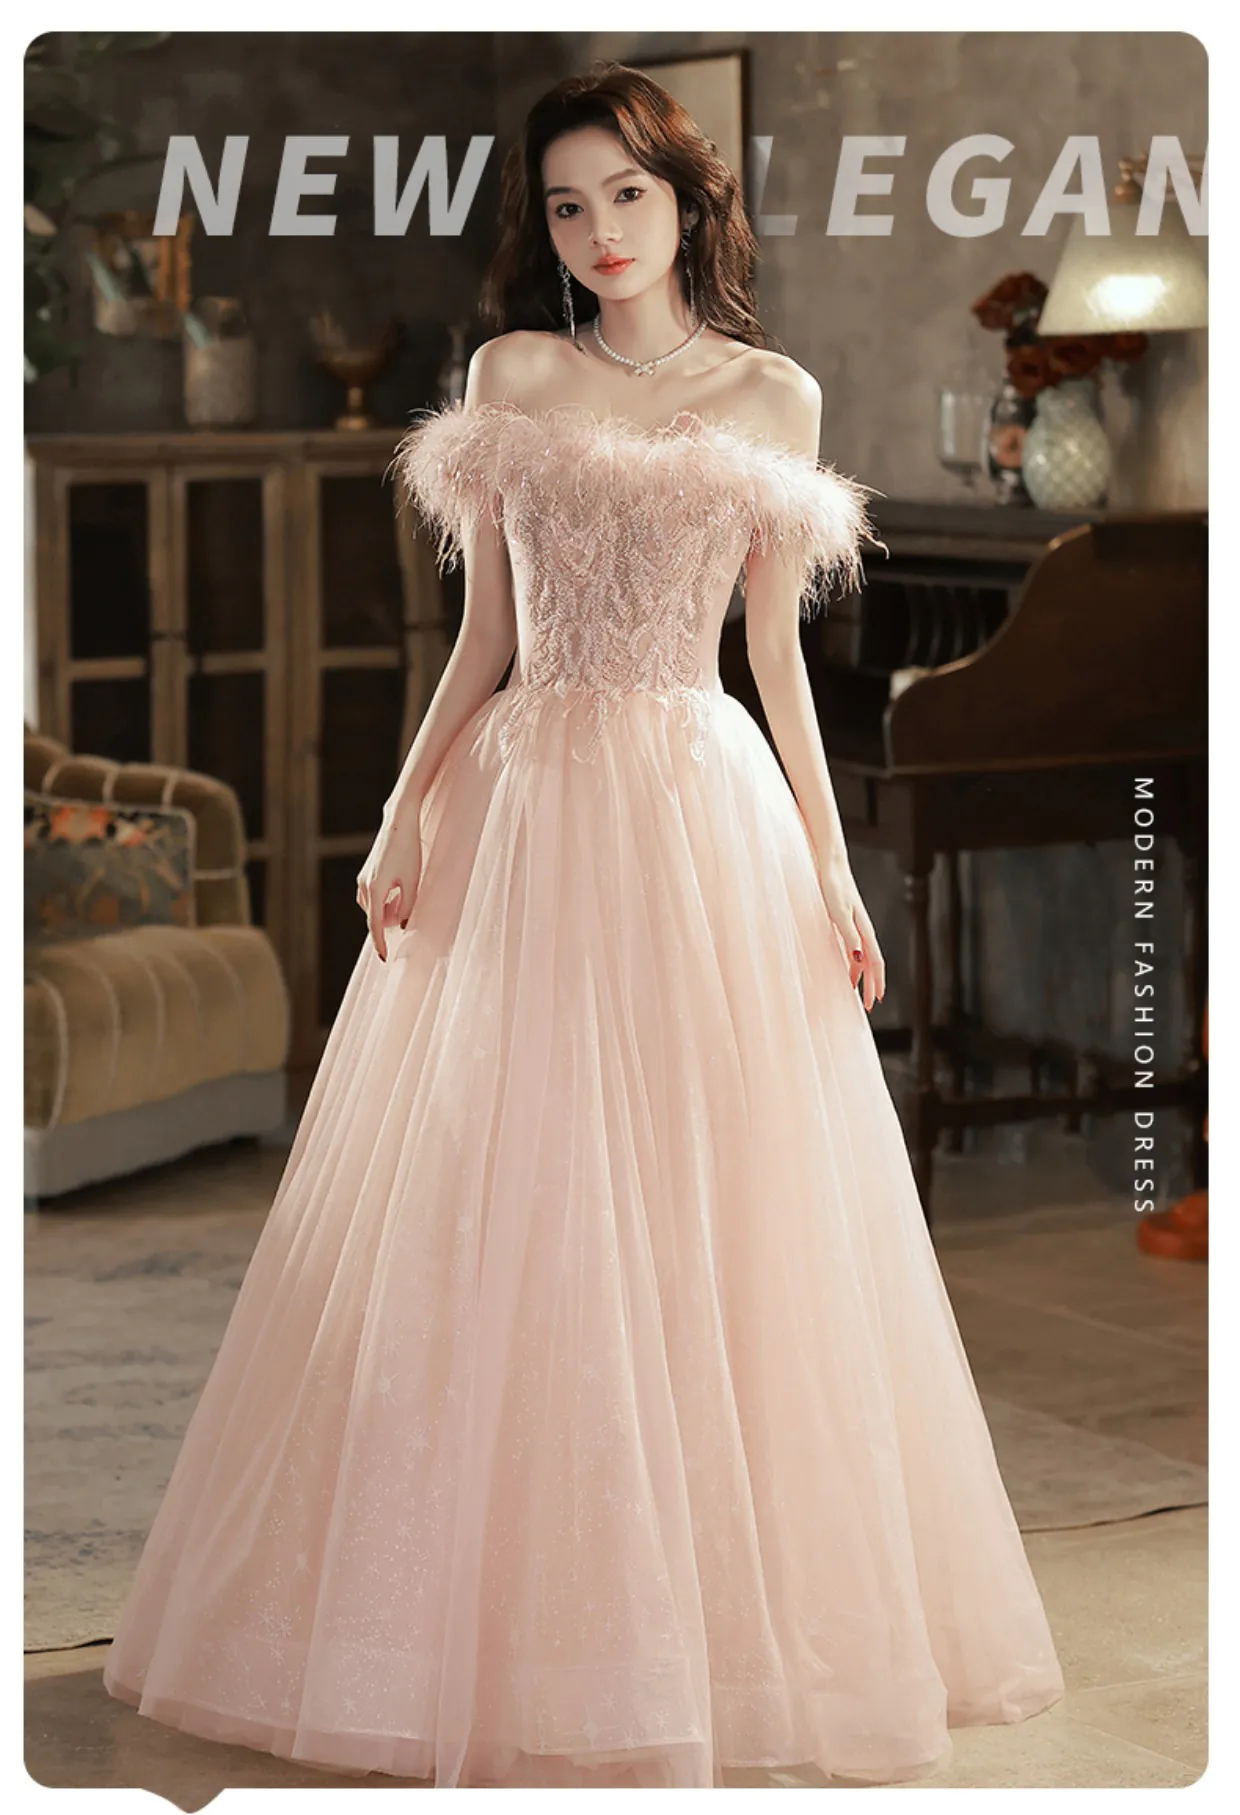 Pink-Off-Shoulder-Feather-Cocktail-Party-Prom-Dress-Evening-Gown06